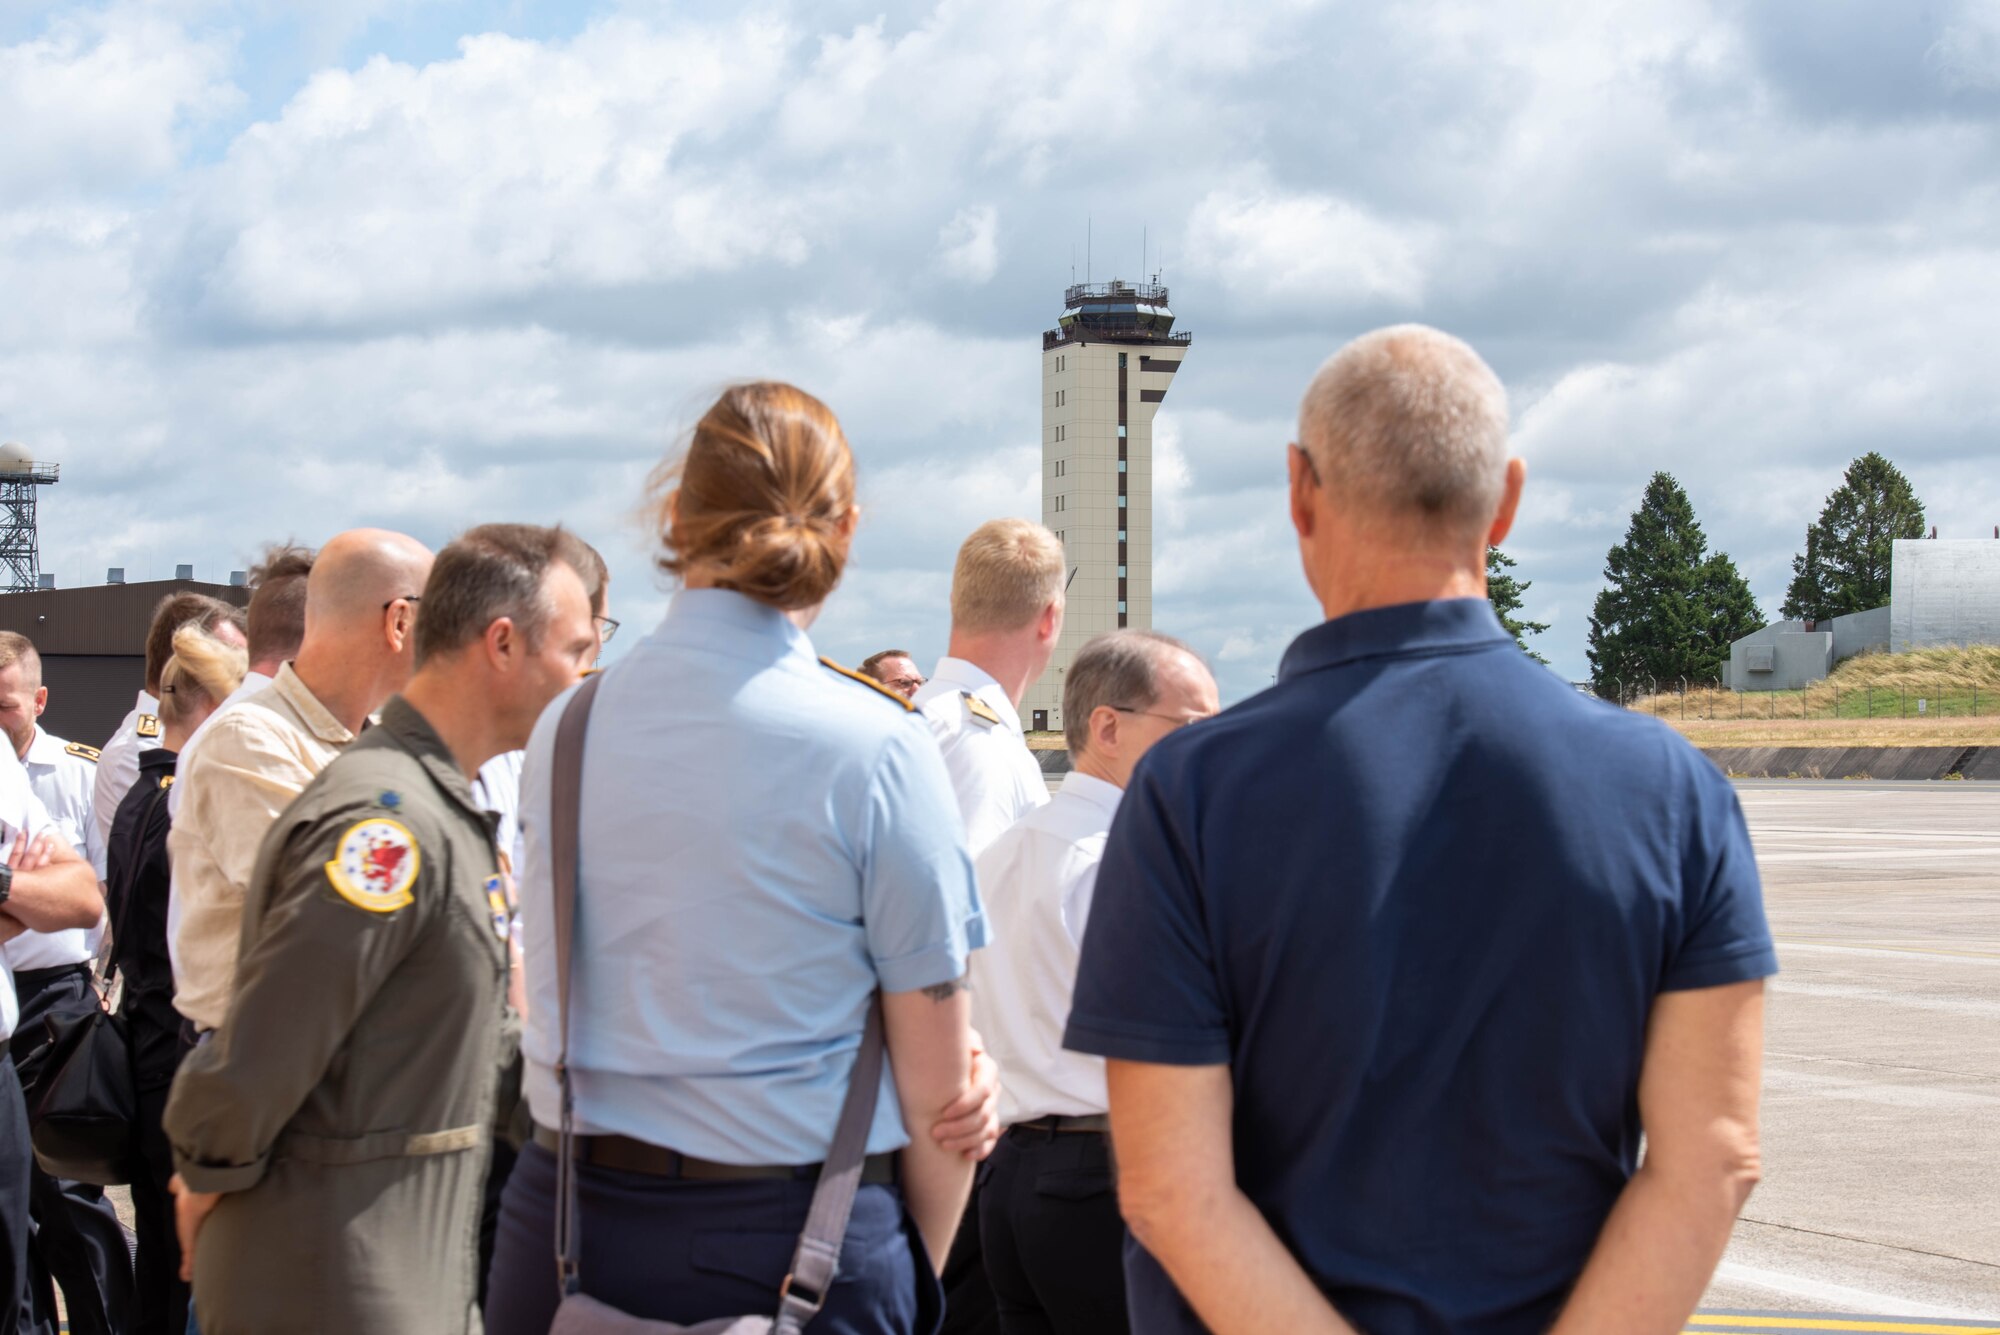 People look at an air traffic control tower.